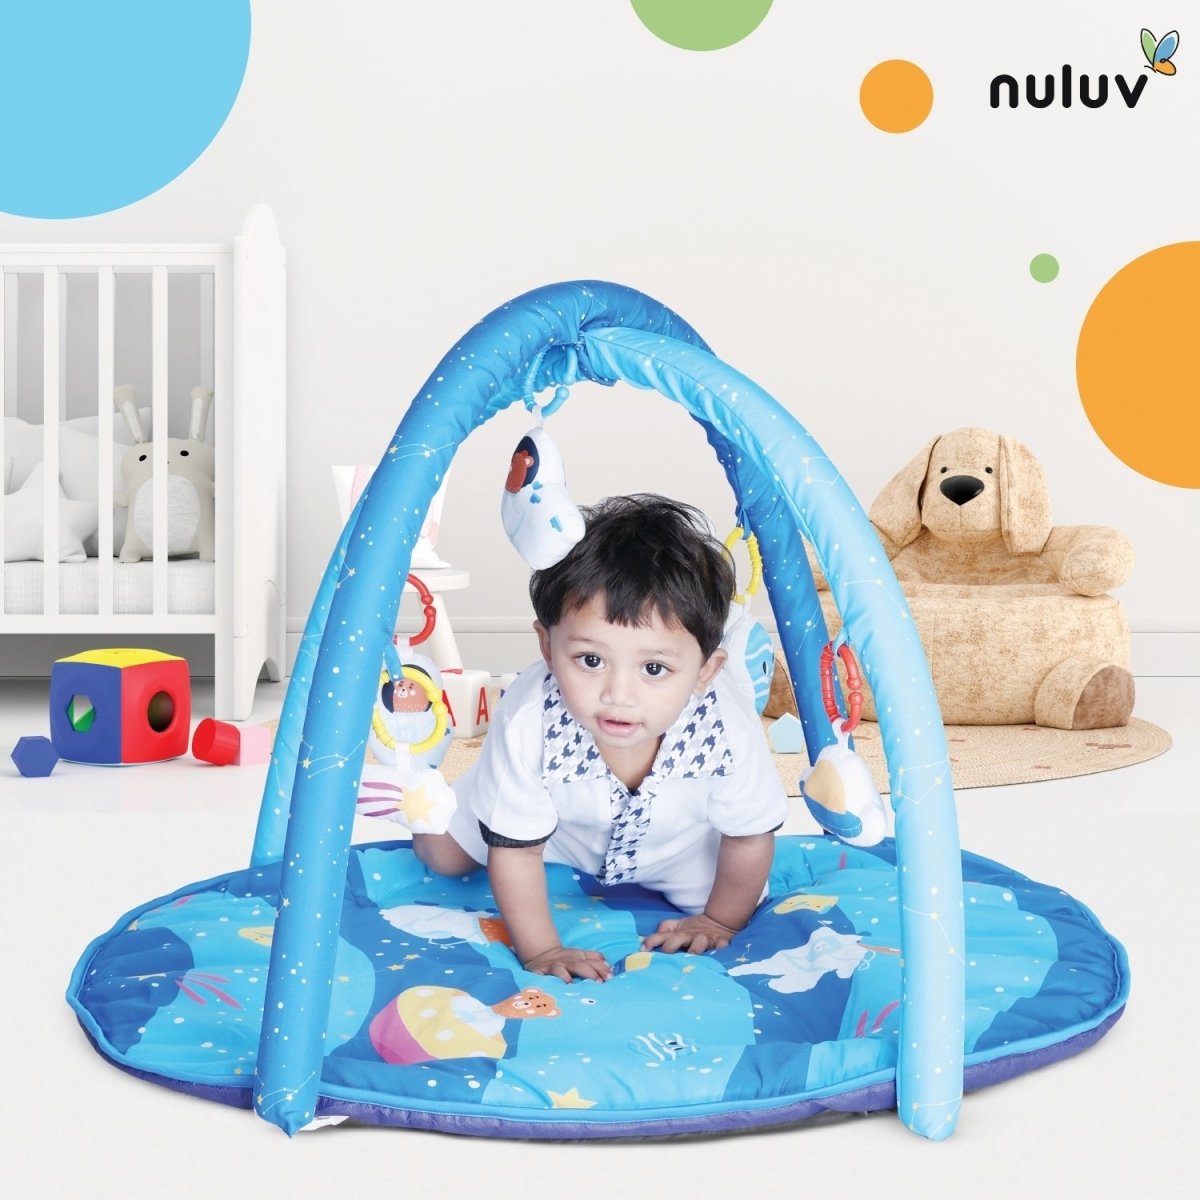 Nuluv Playgym- Space - NU-I-0014